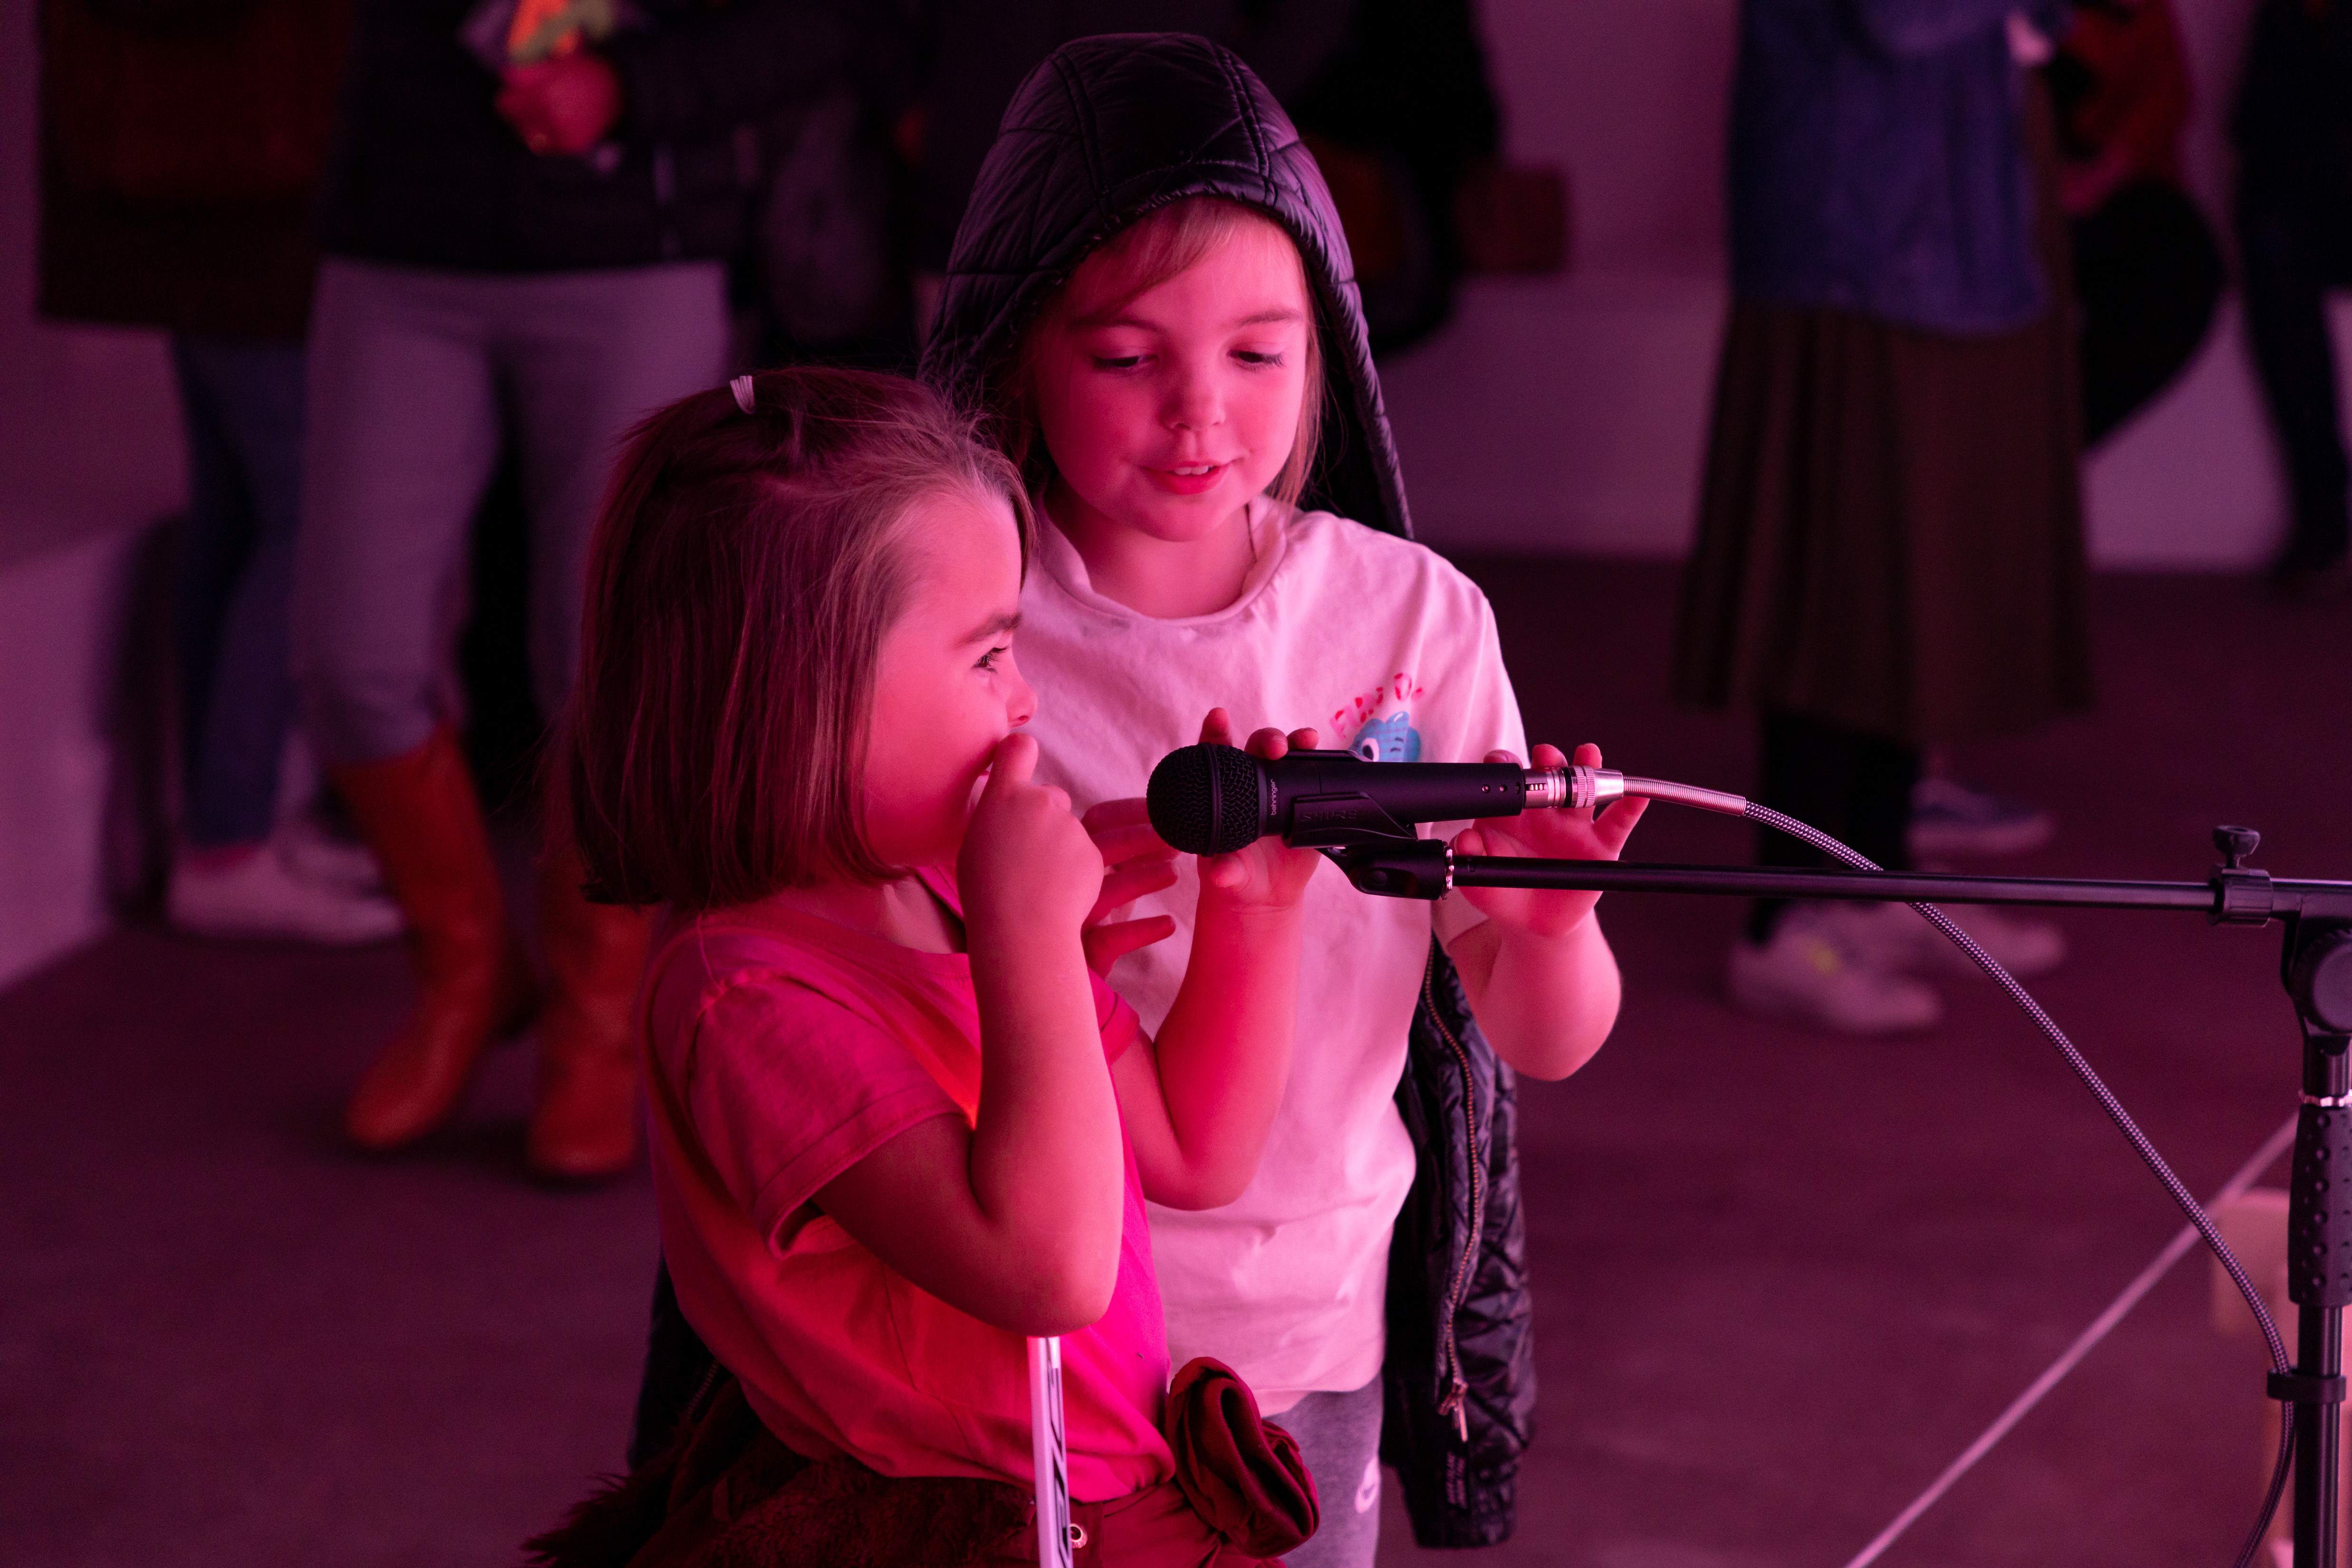 Two children making sounds into a microphone, surrounded by pink light